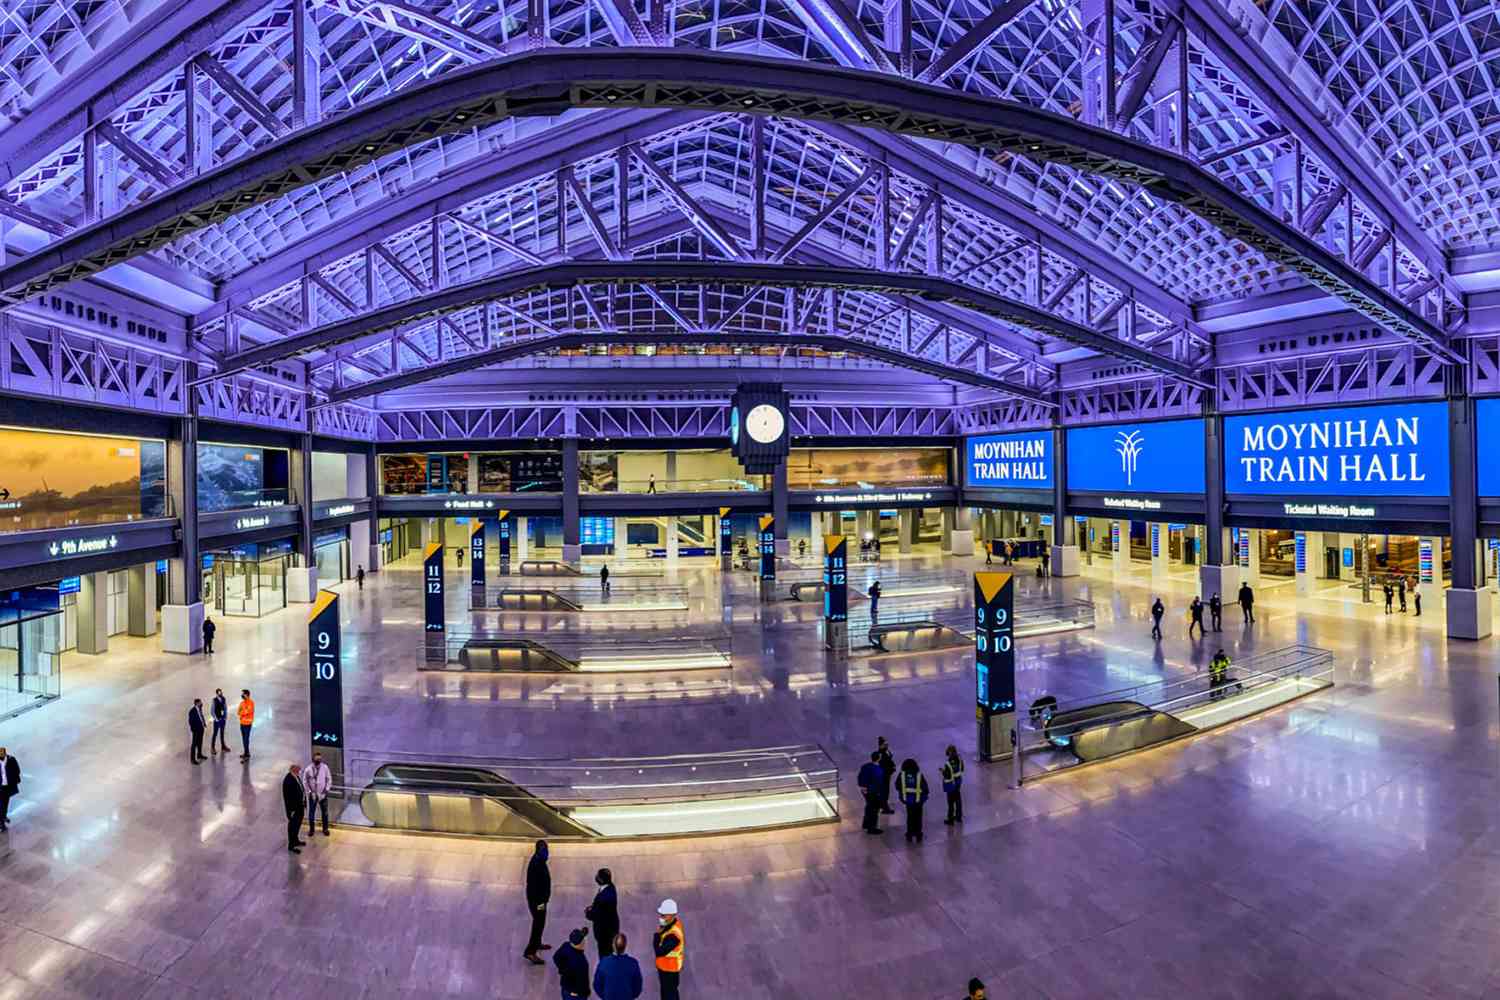 After Nearly 30 Years, New York City's Penn Station Has a Beautiful New Train Hall